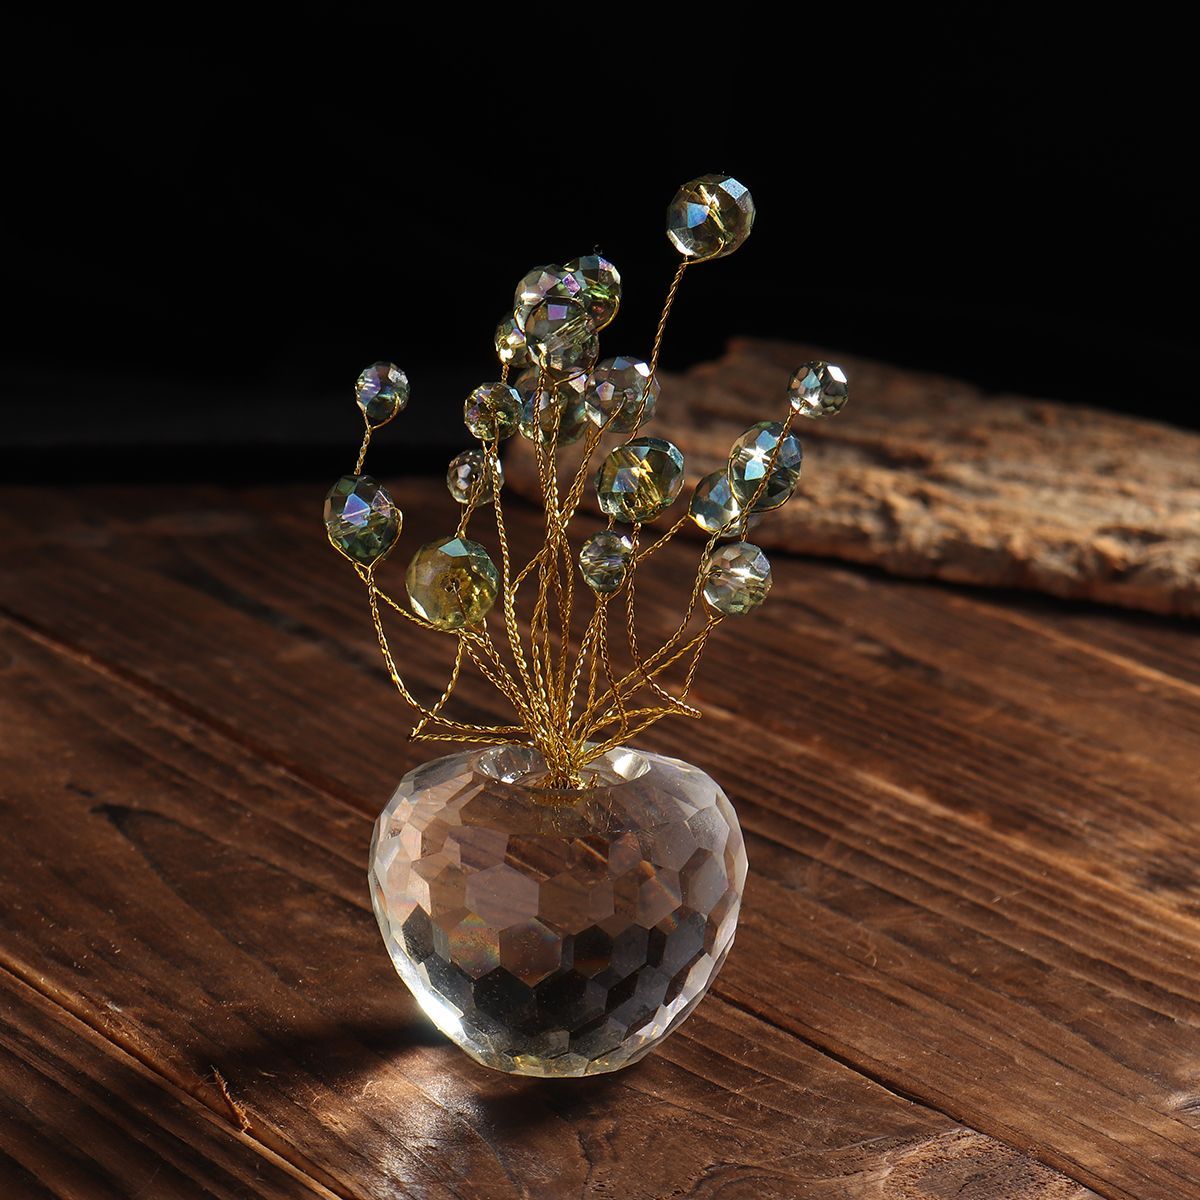 10cm-3D-Crystal-Apple-Model-Glass-Craft-Table-Top-Home-Ornaments-Decoration-1736366